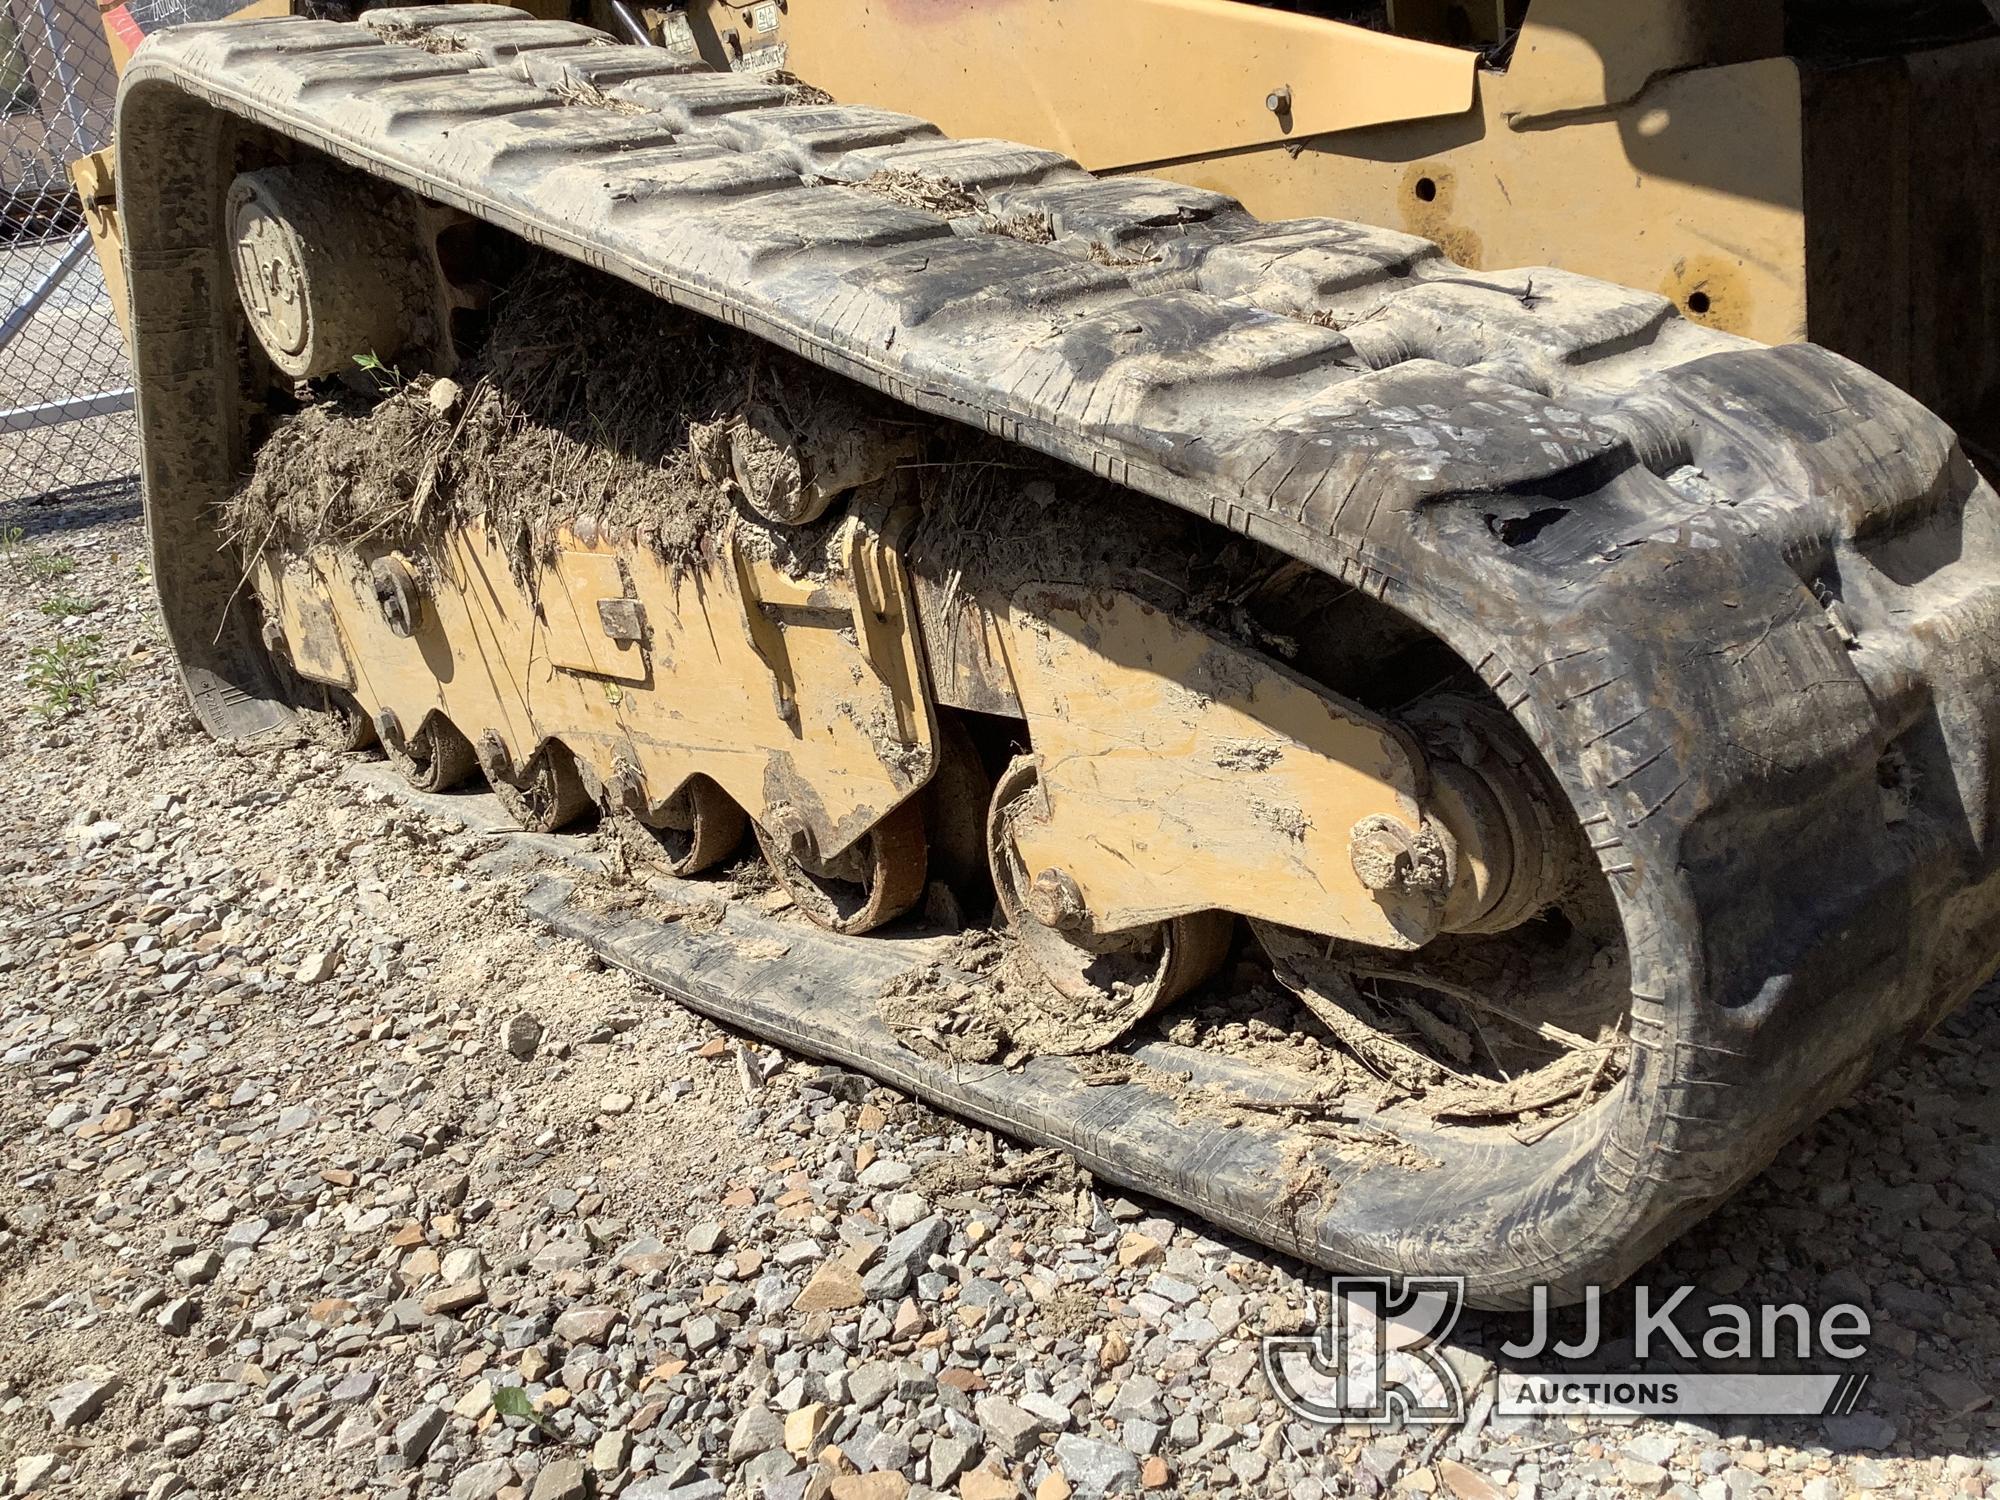 (Smock, PA) 2019 Caterpillar 299D2XHP Skid Steer Loader, Selling with attachment item #1422755 Not R